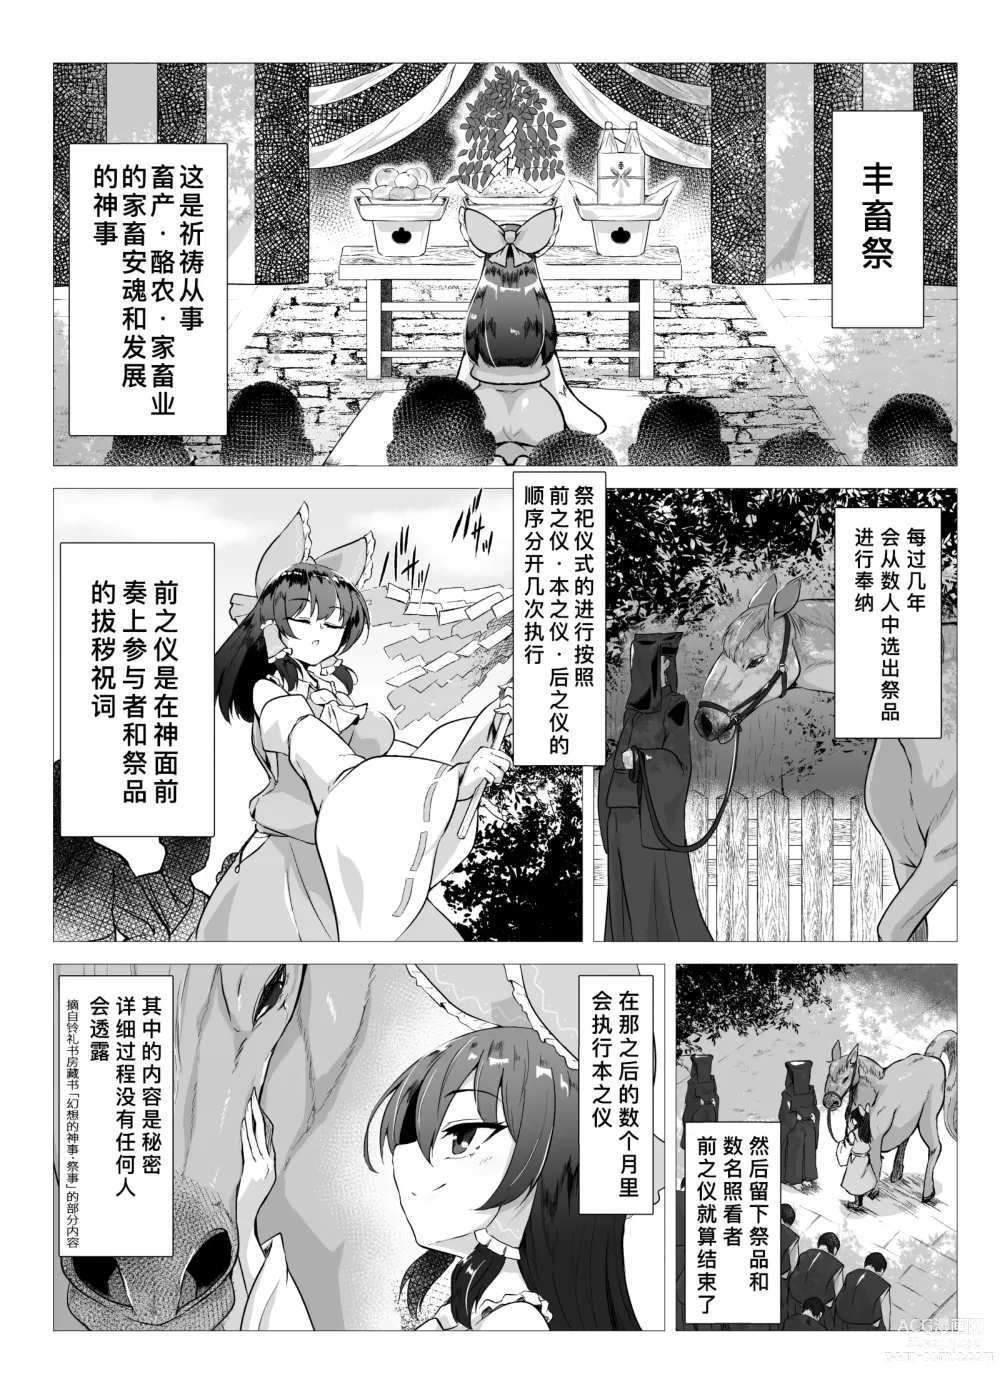 Page 3 of doujinshi 马巫女灵梦